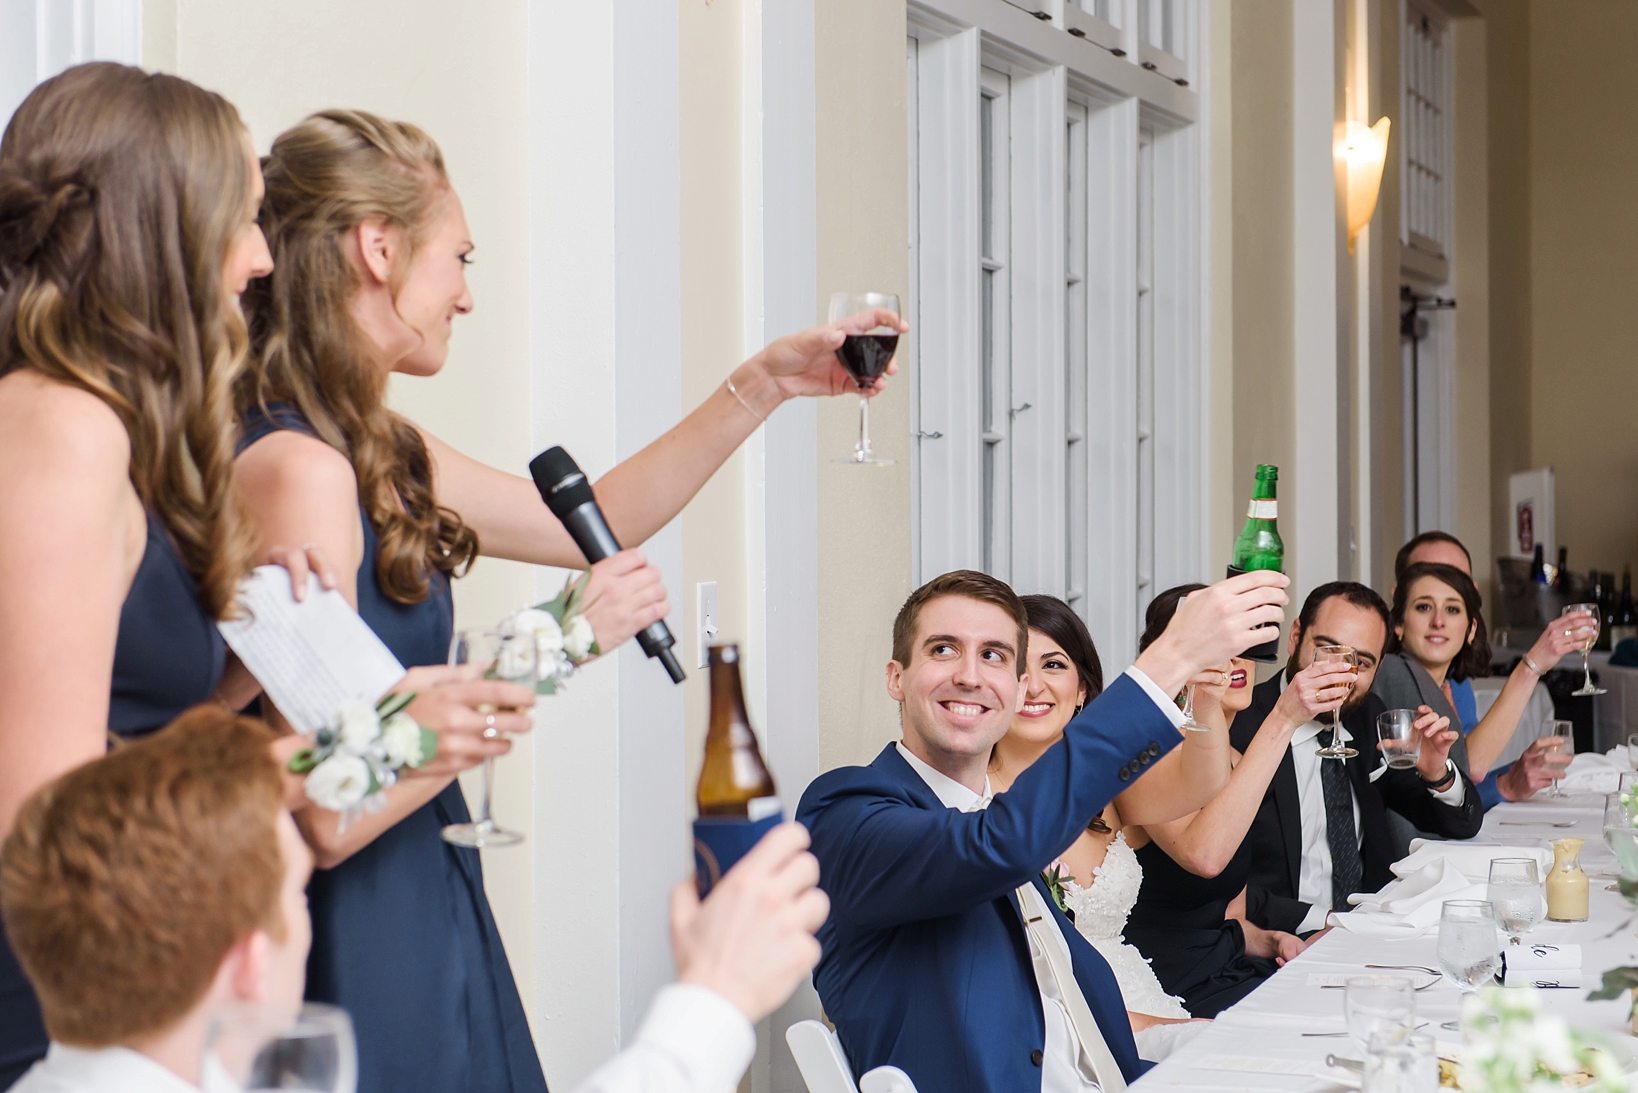 The grooms sisters give a toast during the wedding reception by Sarah & Ben Photography